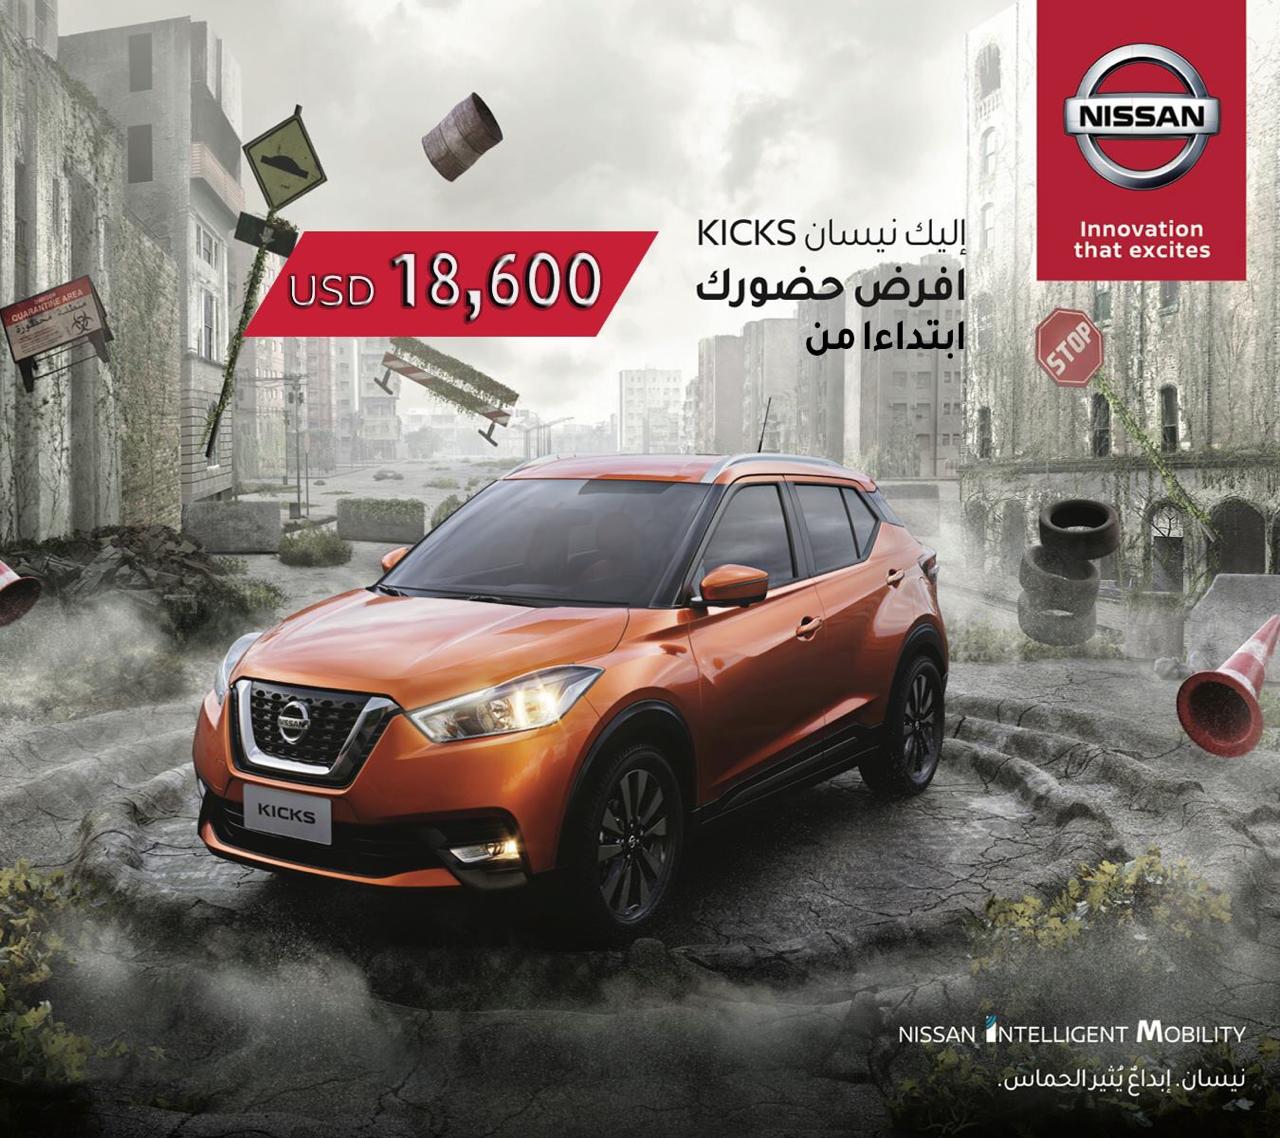 Nissan Altima .. Renew your love for driving 102122019_de19d213-af30-4bdc-a2b4-9071dac16b8f